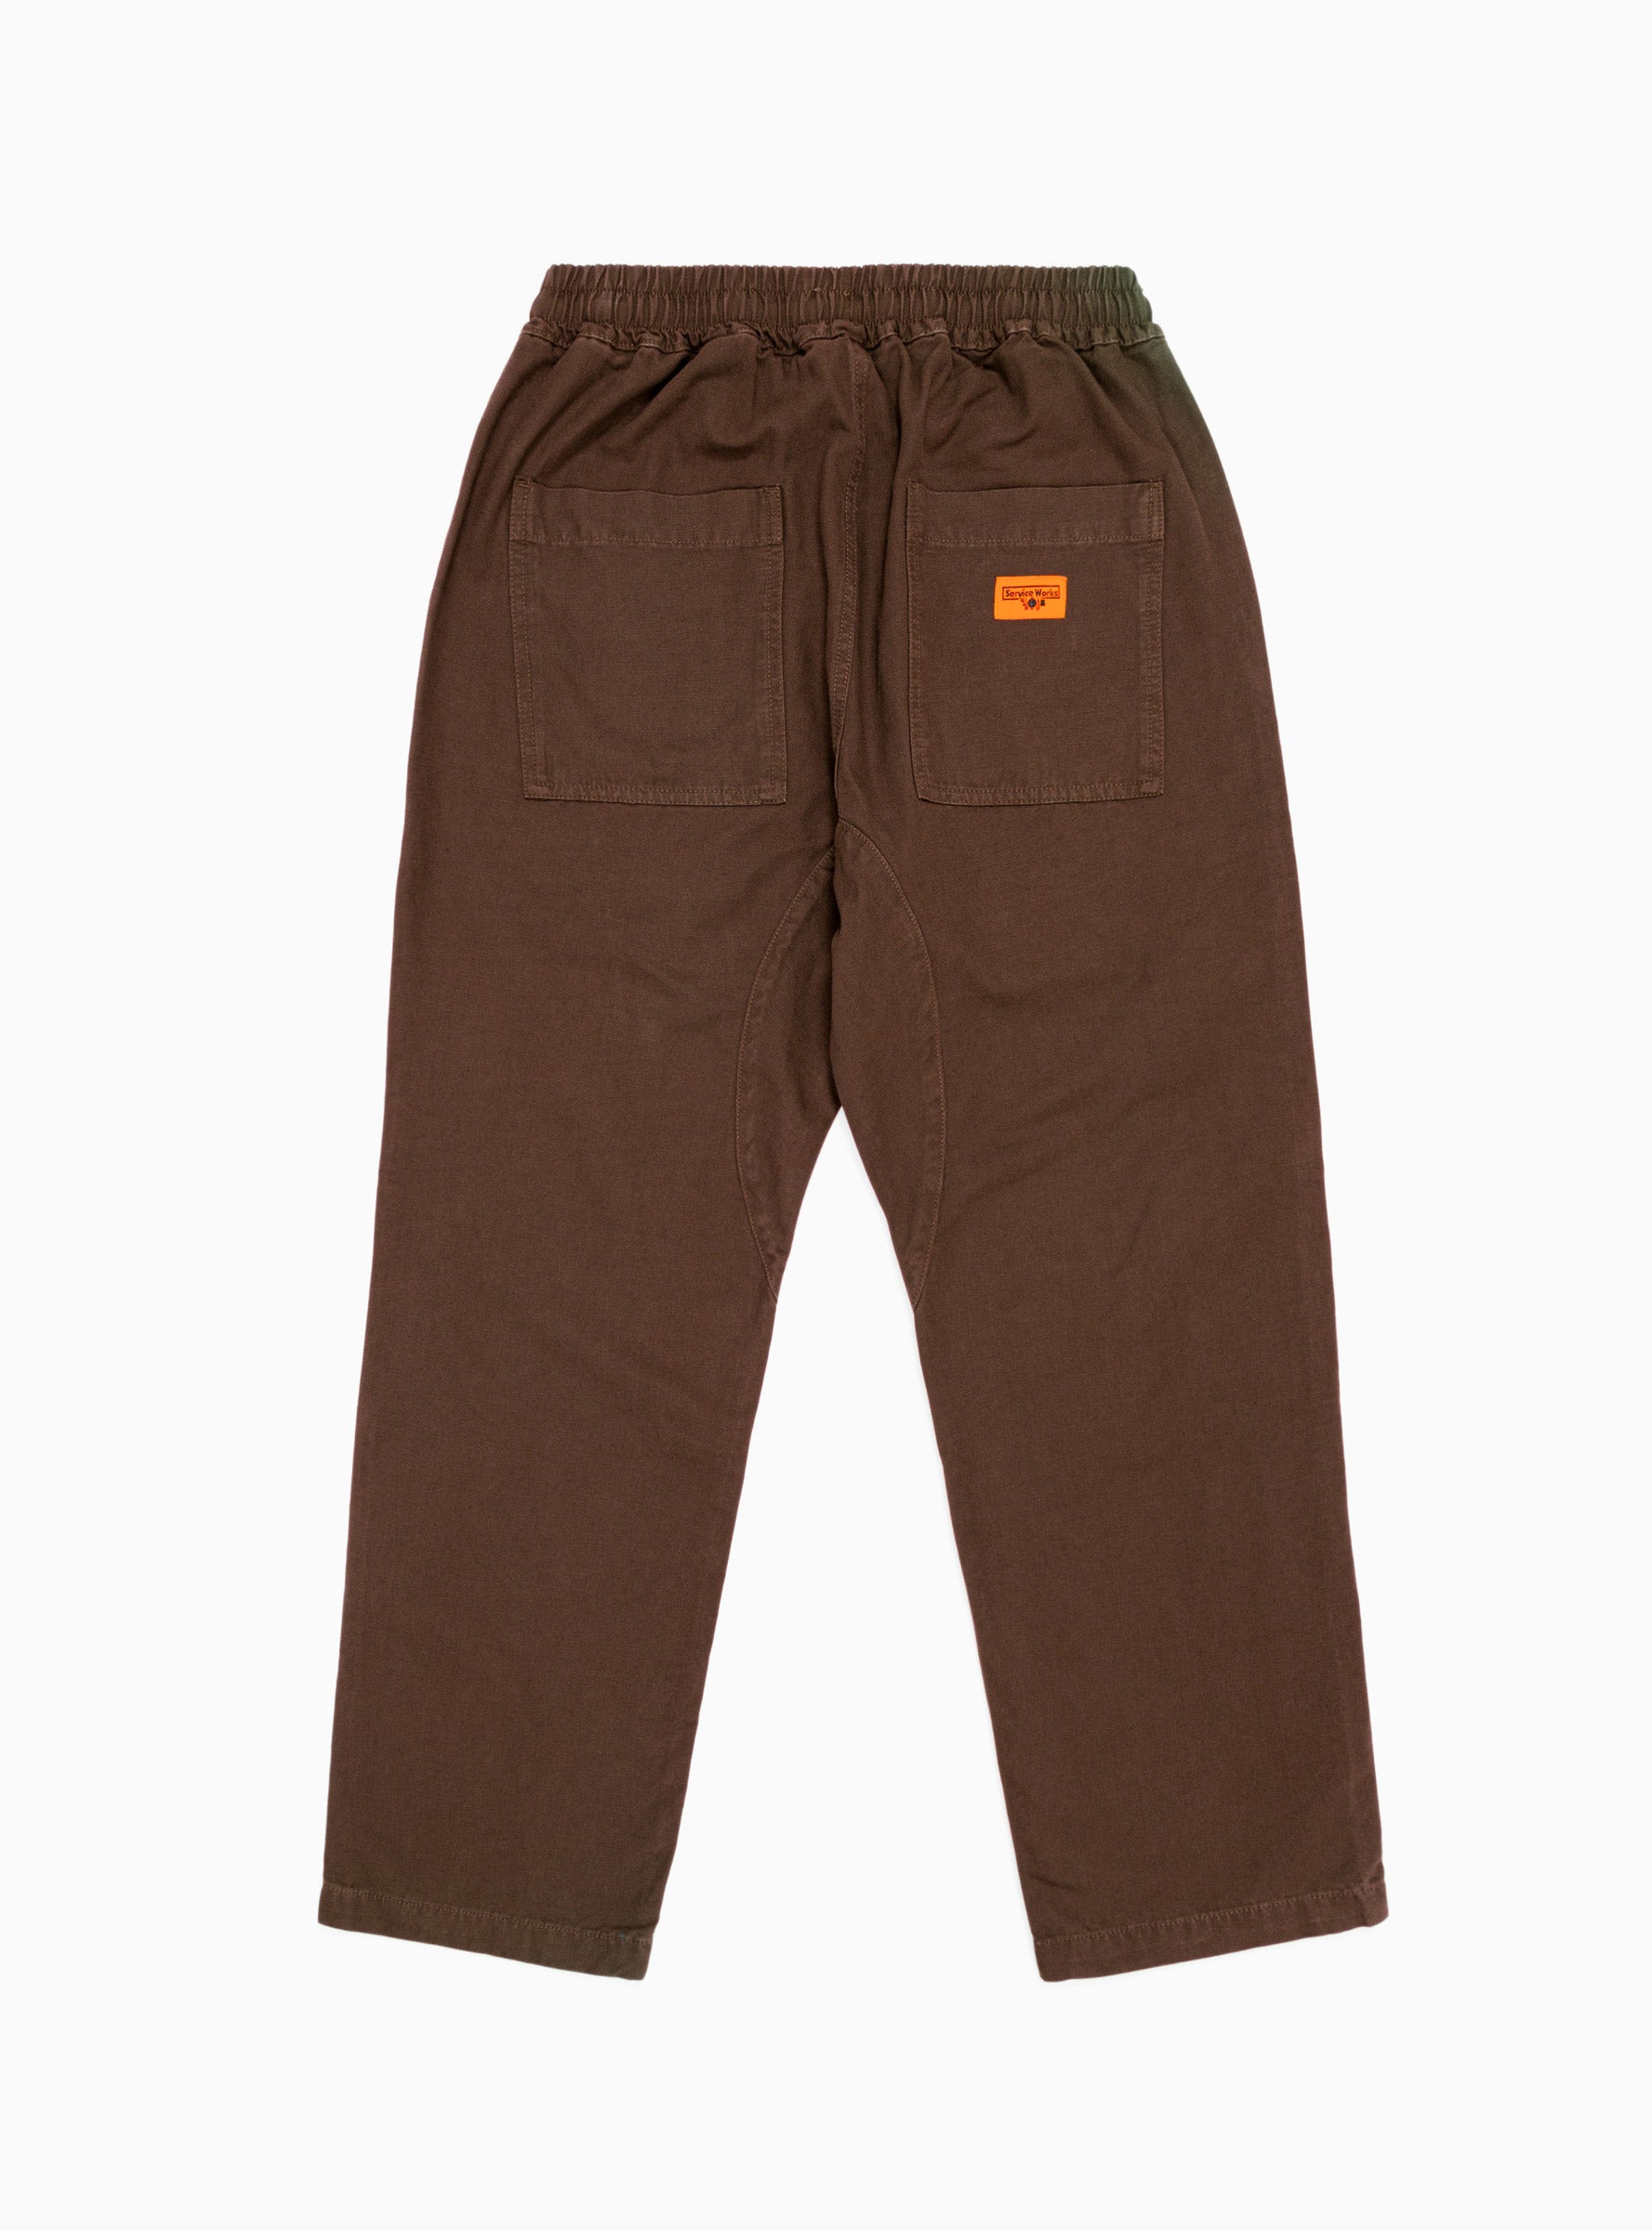 Service Works Service Works Classic Chef Trousers Brown - Size: Large